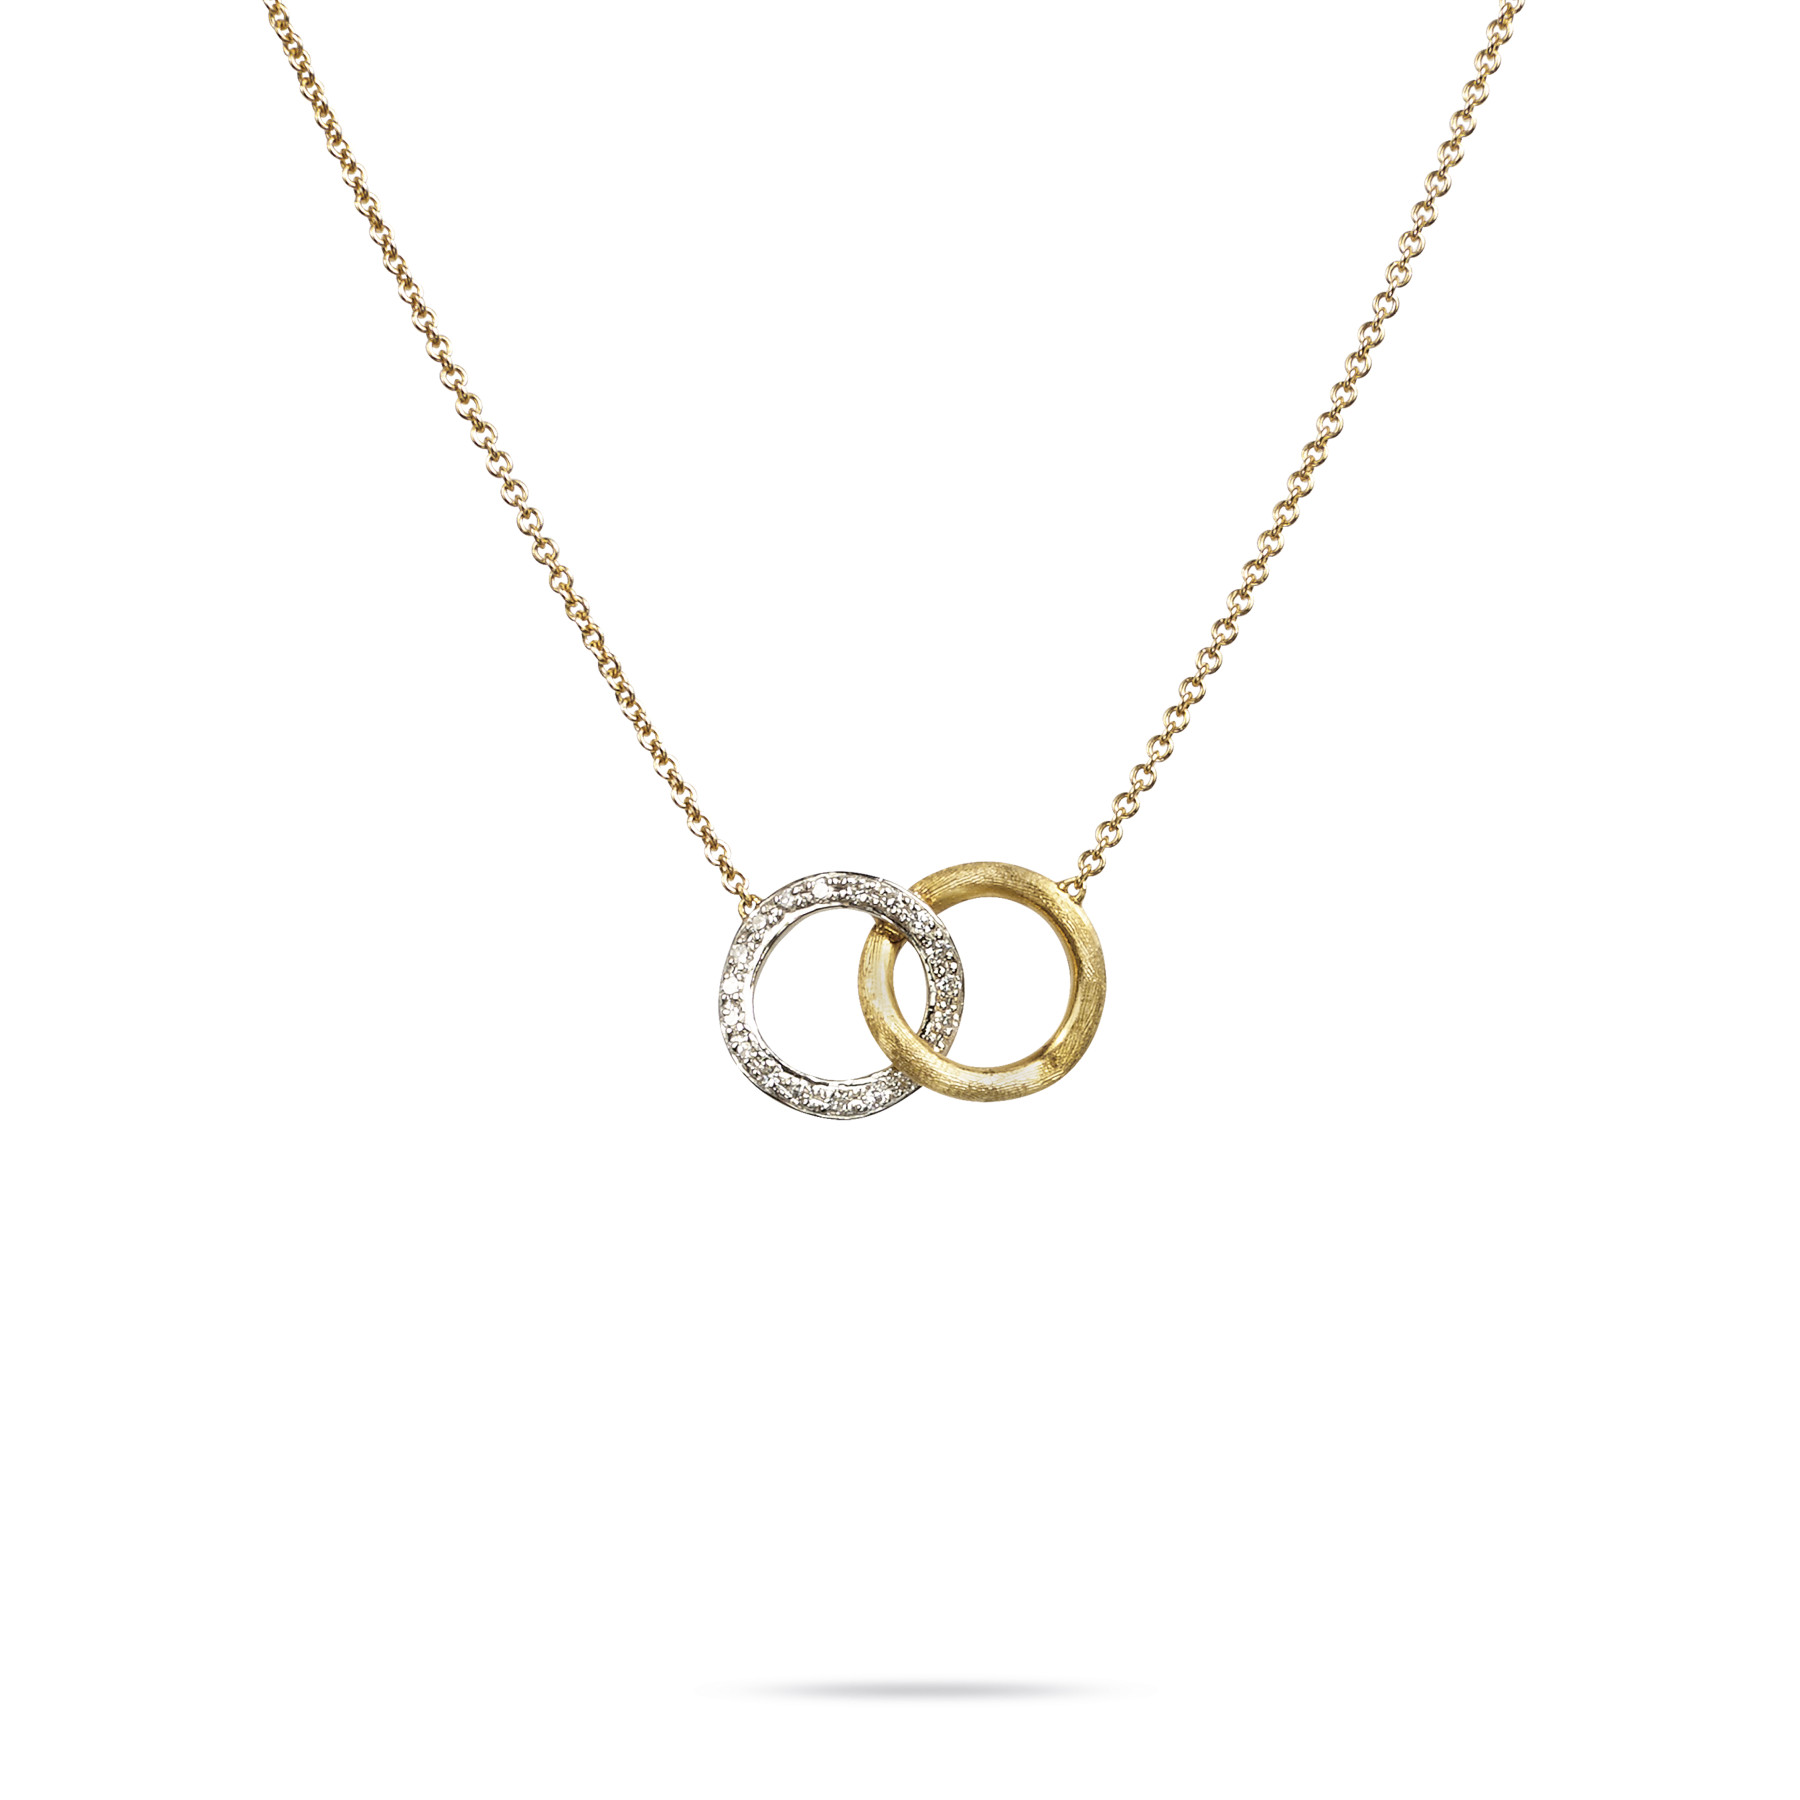 Marco Bicego Jewelry Collection: Shop Online at JR Dunn